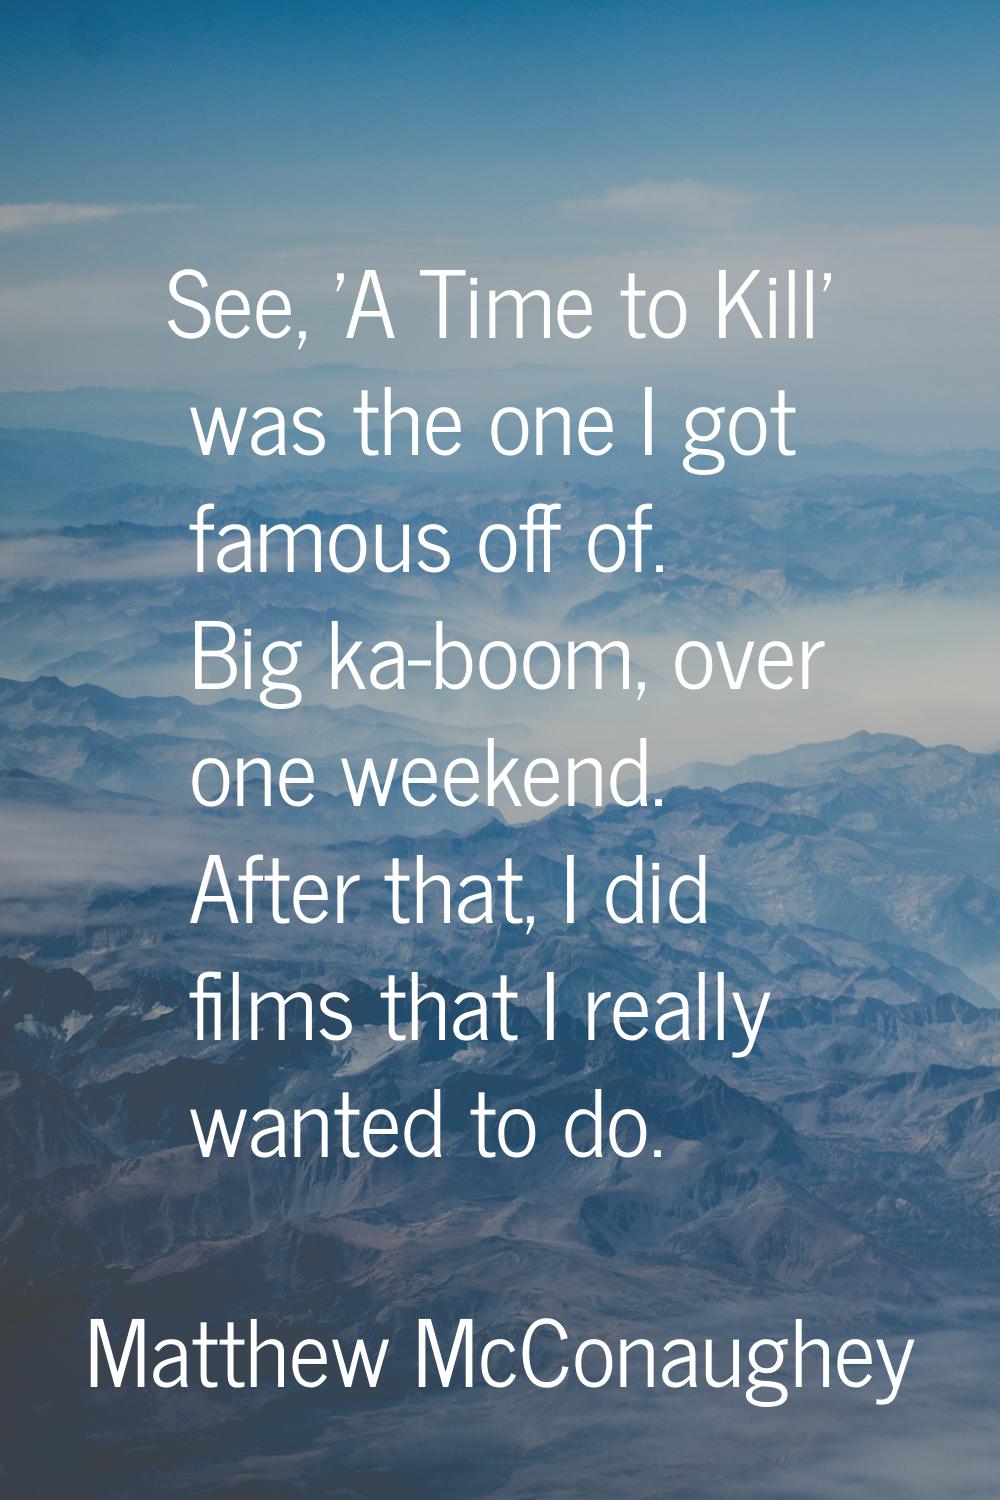 See, 'A Time to Kill' was the one I got famous off of. Big ka-boom, over one weekend. After that, I